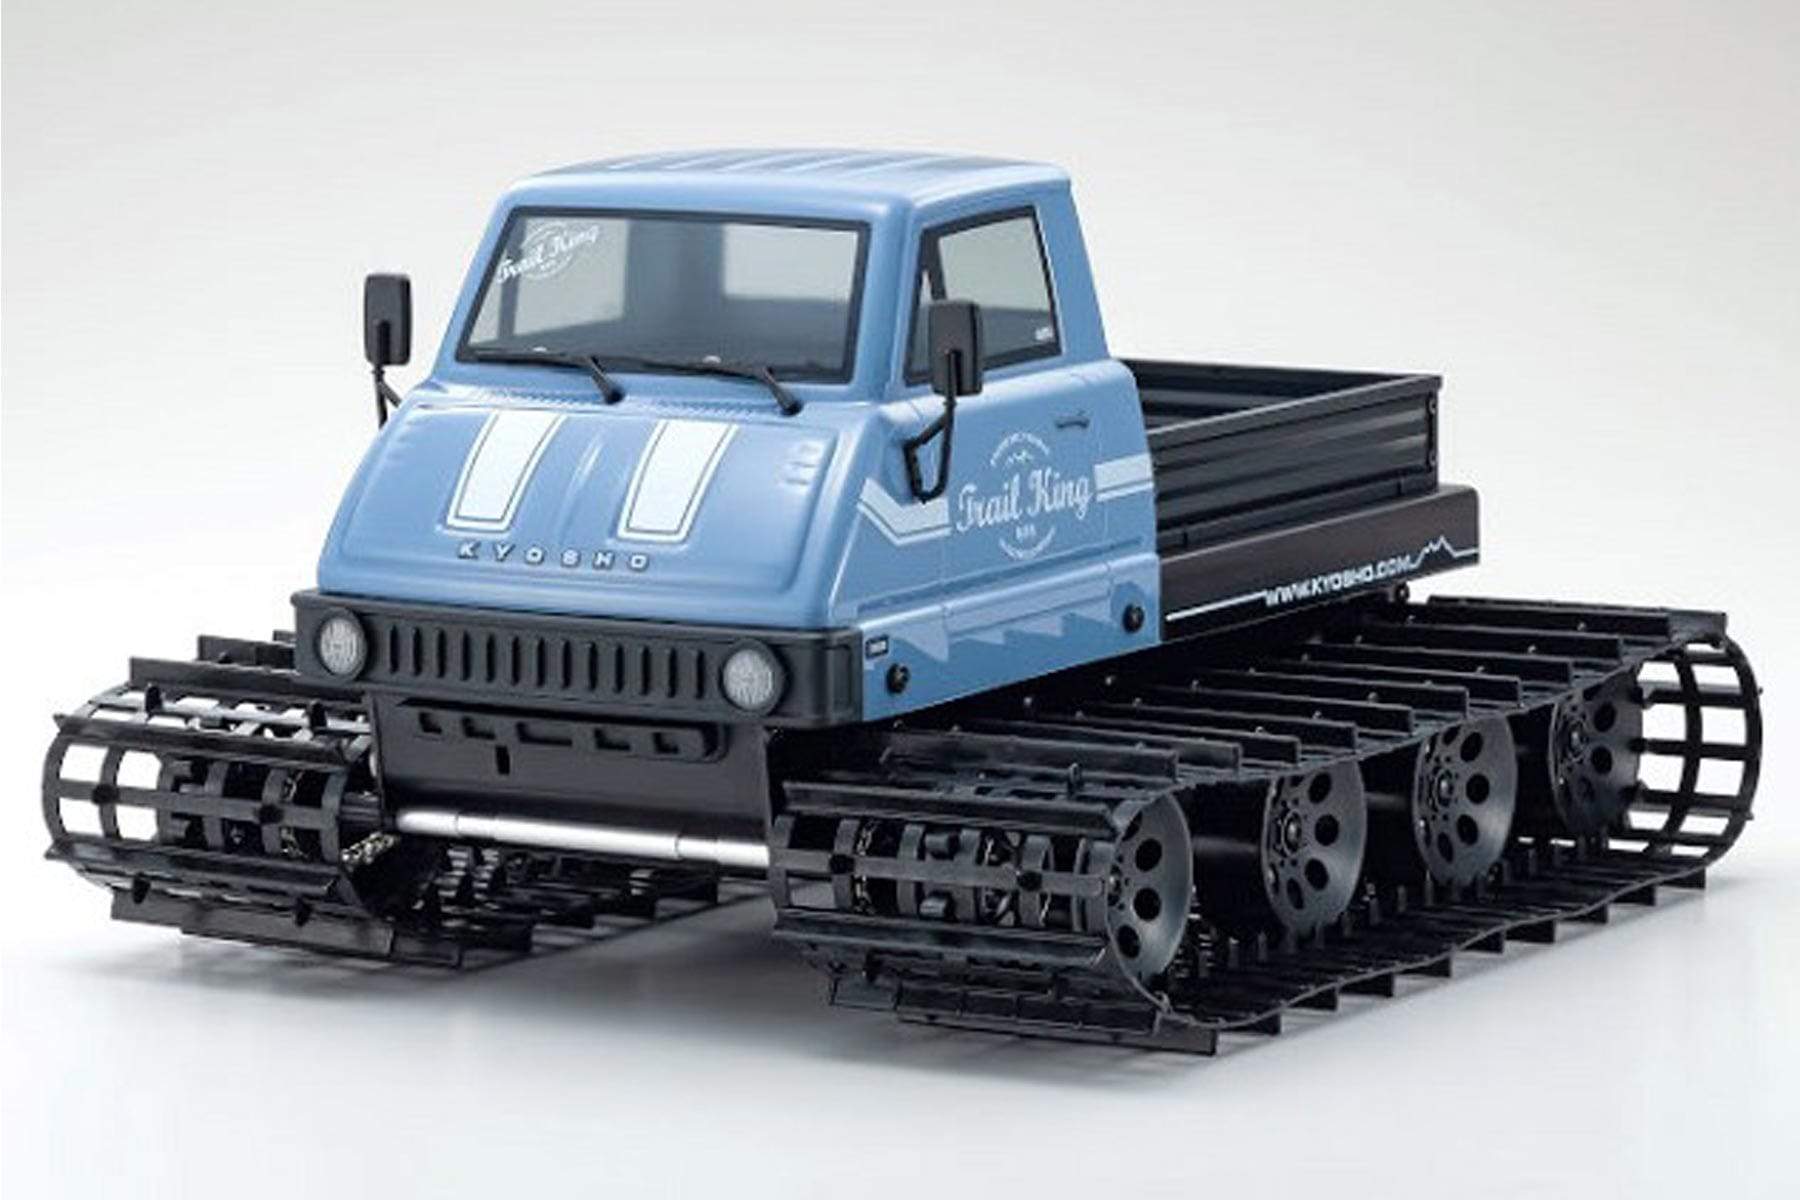 Kyosho Trail King 1/12 Scale ReadySet All Terrain Tracks Vehicle (Blue) - RTR KYO34903T2